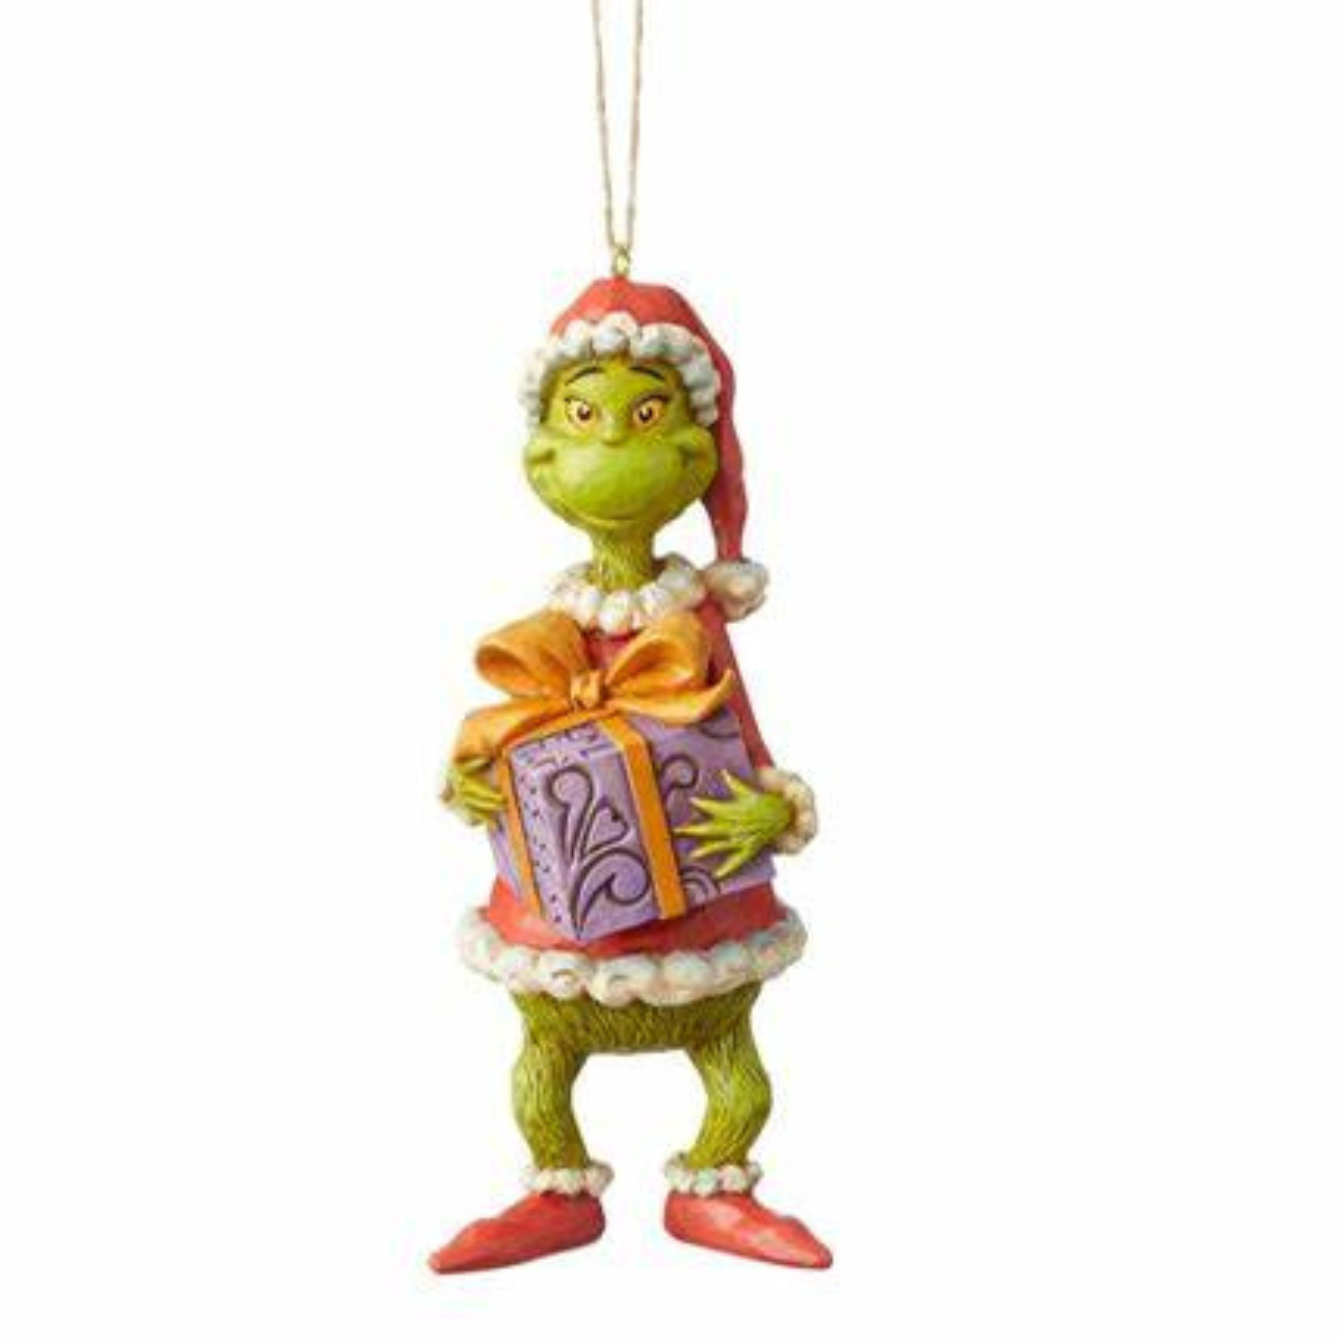 Grinch Holding Present Ornament